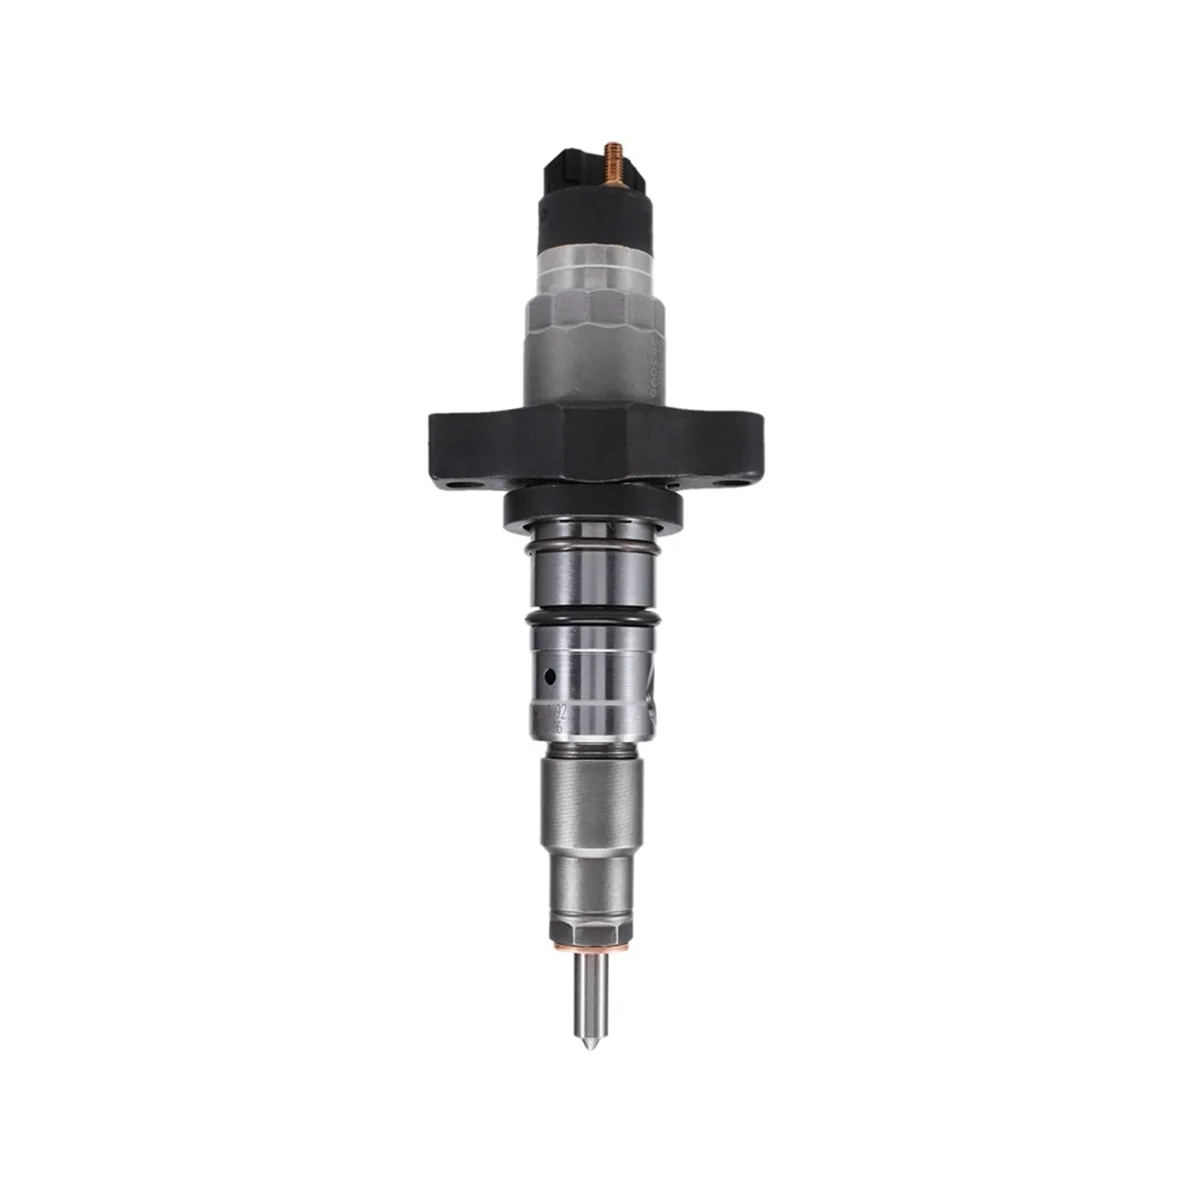 

0445120007 New Common Rail Crude Oil Fuel Injector Nozzle for Bosch for Ford Iveco VW DAF Cummins ISBe 3.9/5.9